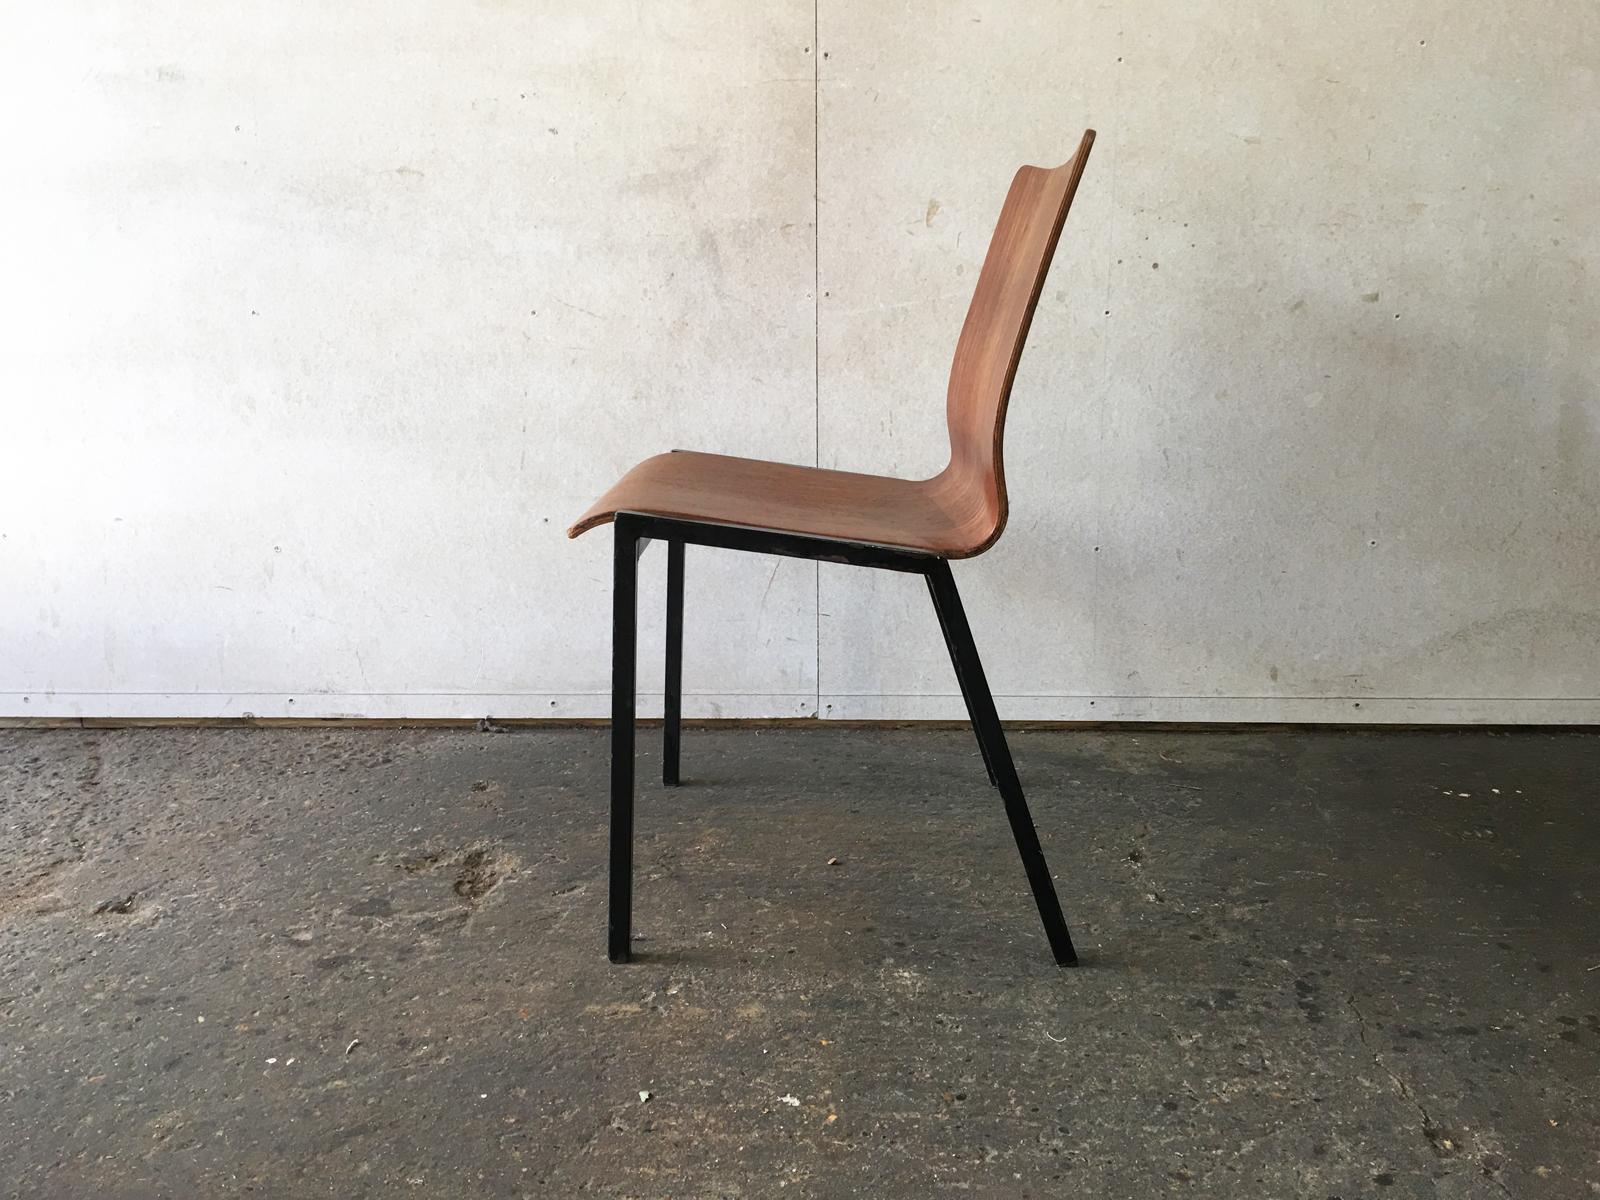 There are a large number of these chairs available, happy to sell any quantity of chairs. Discount on larger orders.

These are Danish chairs, with shaped bentwood seat with a rich wood grain finish. The sit on black painted metal frames. 70